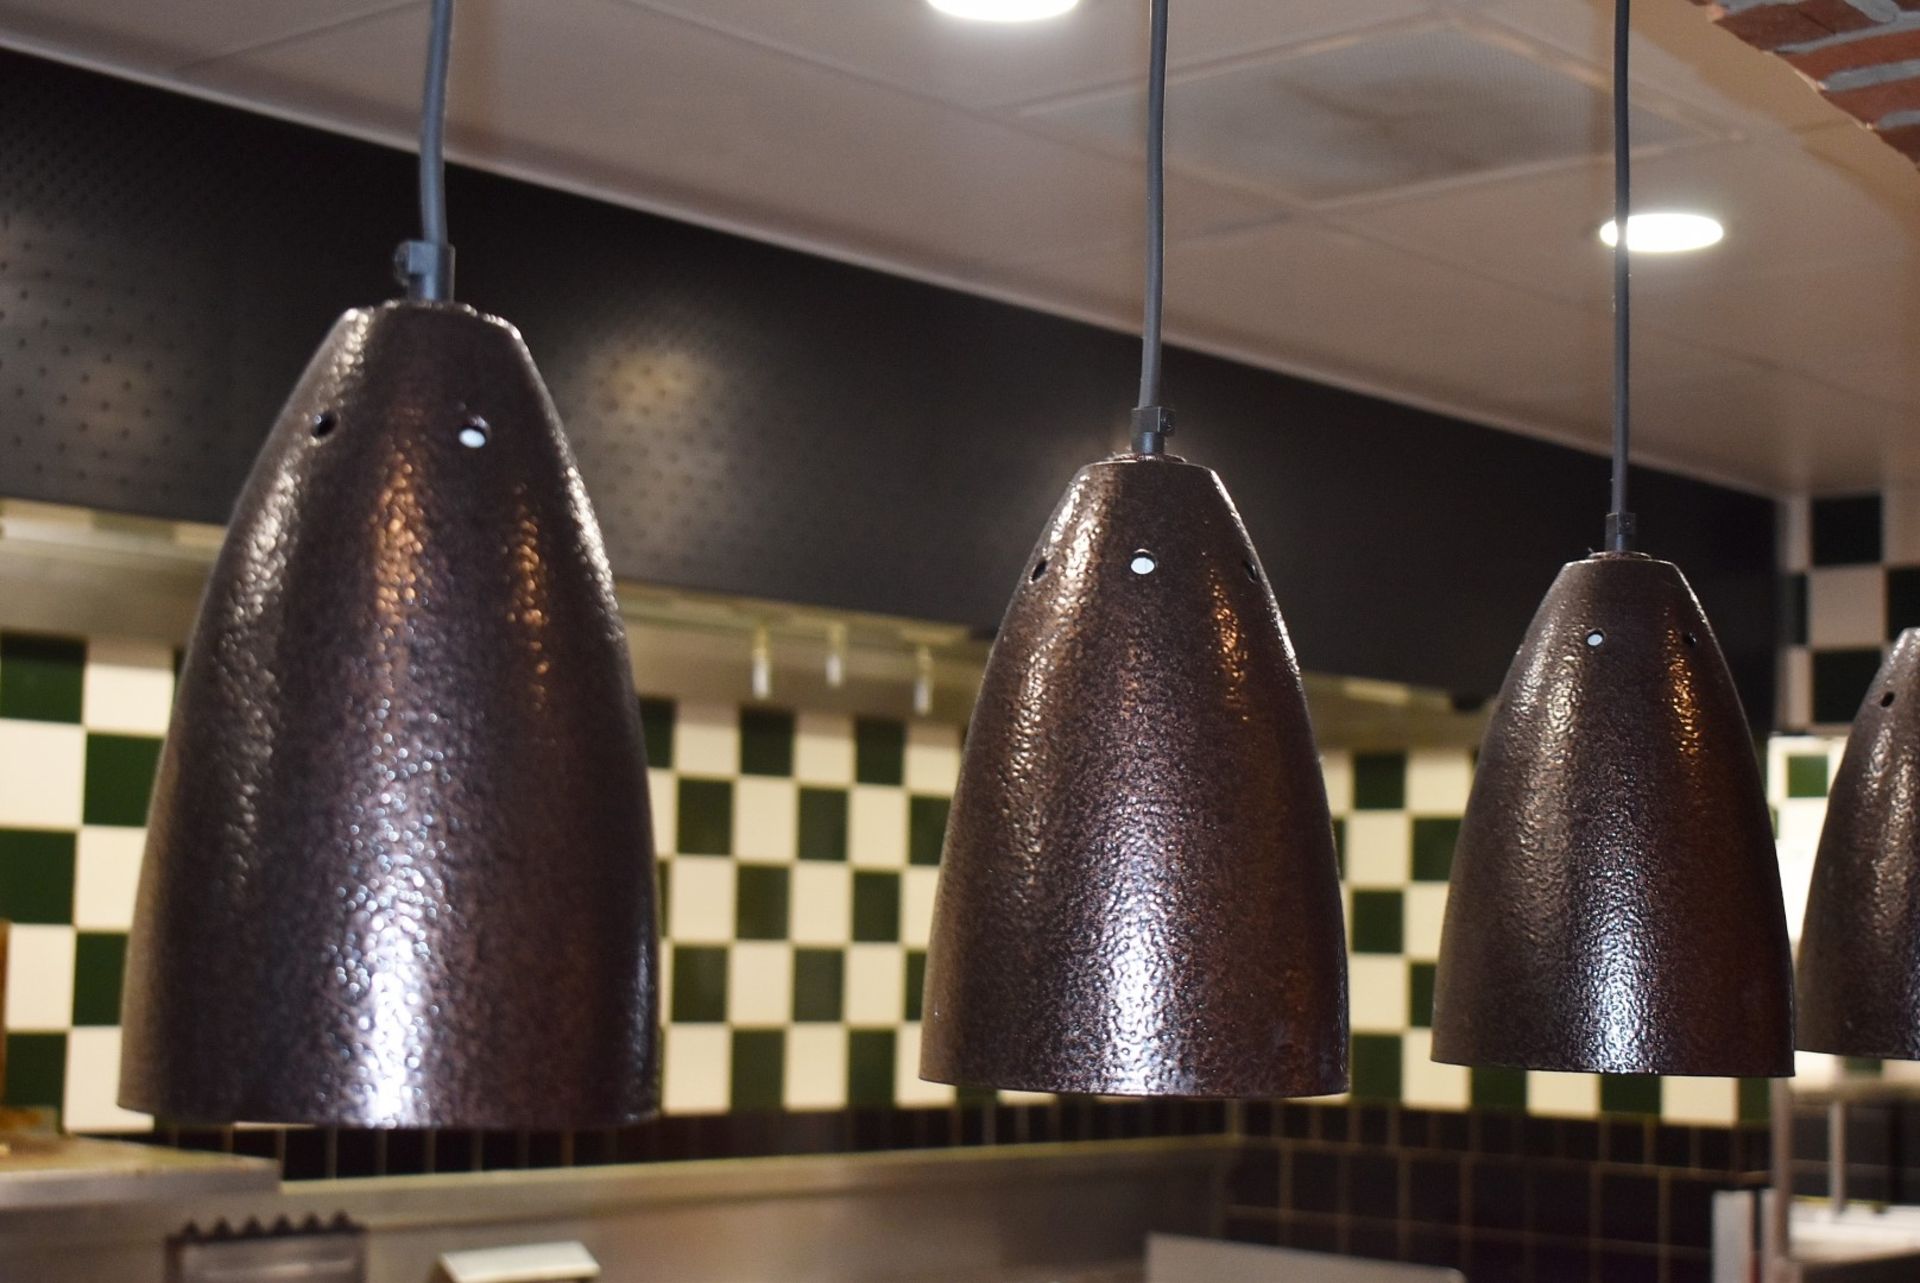 6 x Food Warming Heat Lamps On A Curved Mounting Bracket, For Passthrough Server Areas - From a - Image 2 of 3